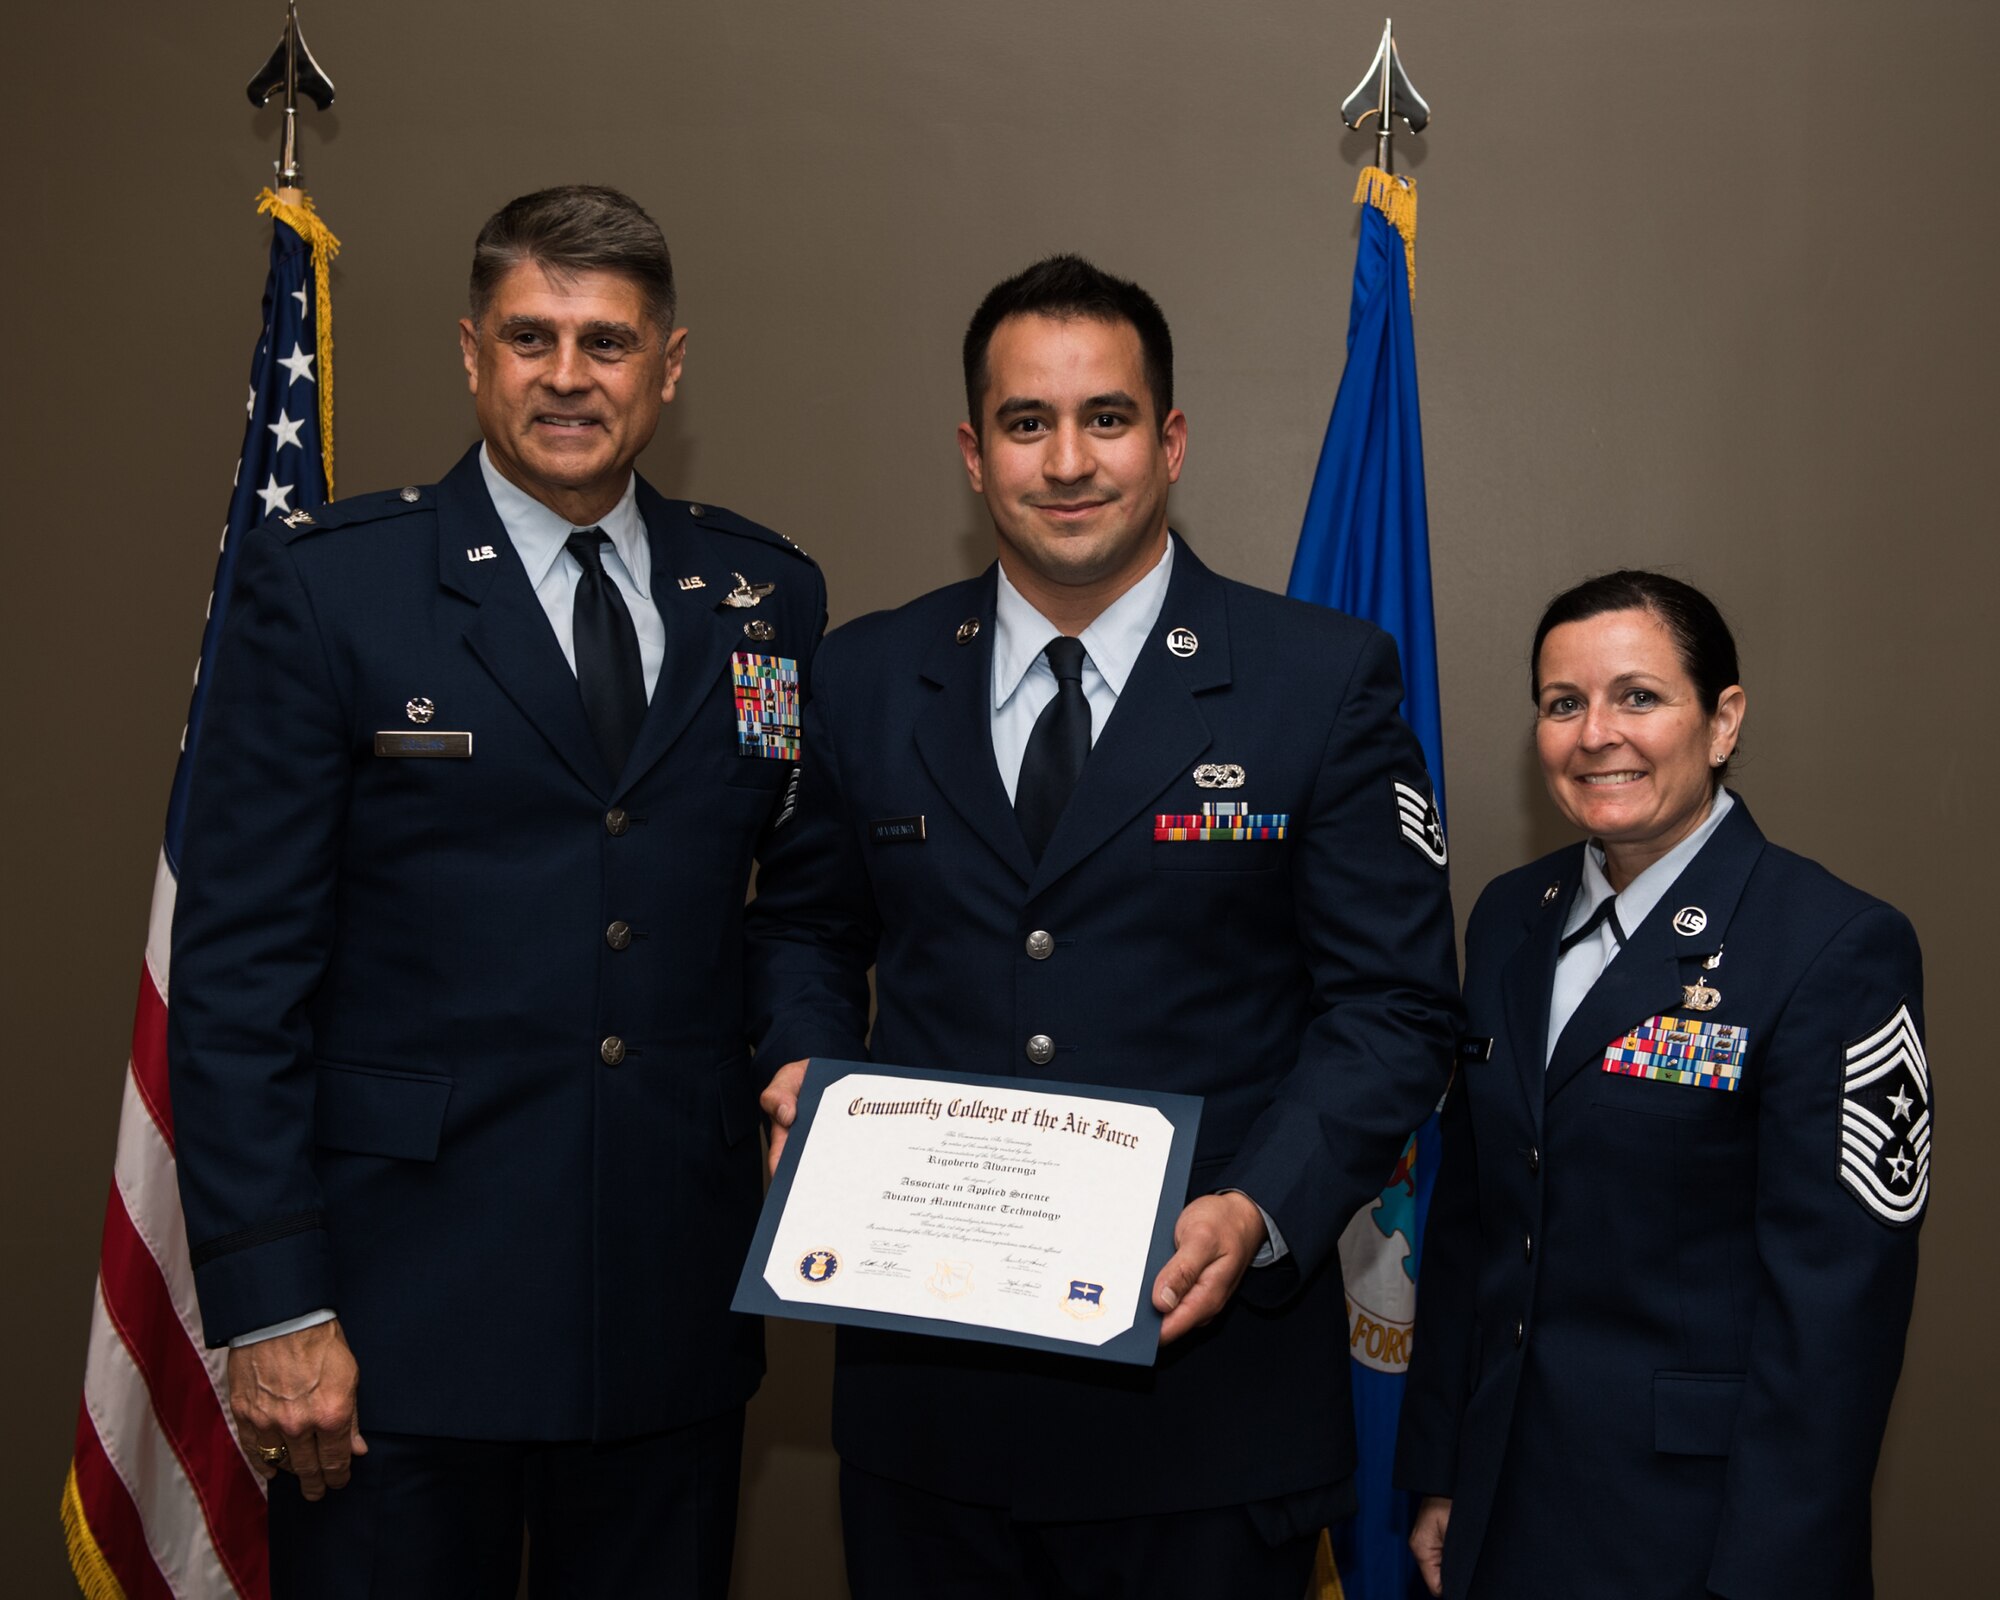 Staff Sgt. Rigoberto Alvarenga, with the 932nd Airlift Wing, receives his Community College of the Air Force associate degree in applied science certificate from 932nd AW commander, Col. Glenn Collins during a CCAF graduation ceremony, June 2, 2019, Scott Air Force Base, Illinois. Wing leadership and fellow Airmen joined the graduates to celebrate their higher education accomplishment. (U.S. Air Force photo by Master Sgt. Christopher Parr)